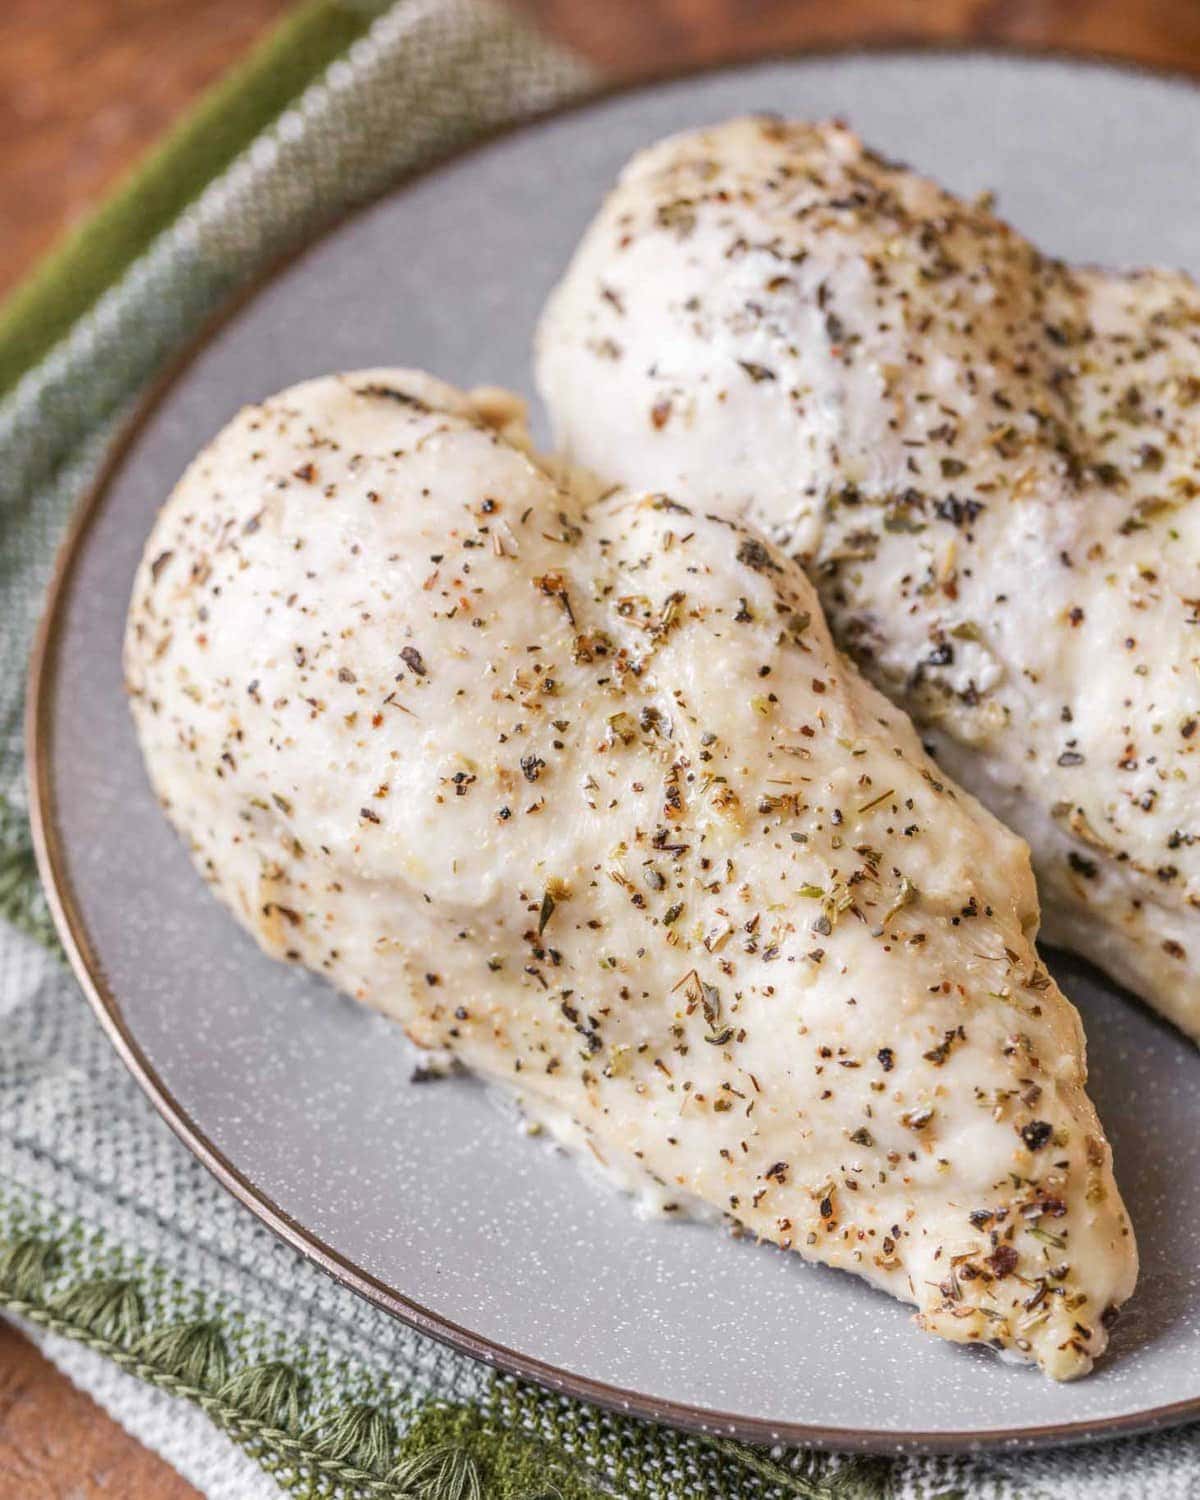 Oven Baked Chicken How To Bake Chicken Breasts Lil Luna,Homemade Vanilla Cake Mix